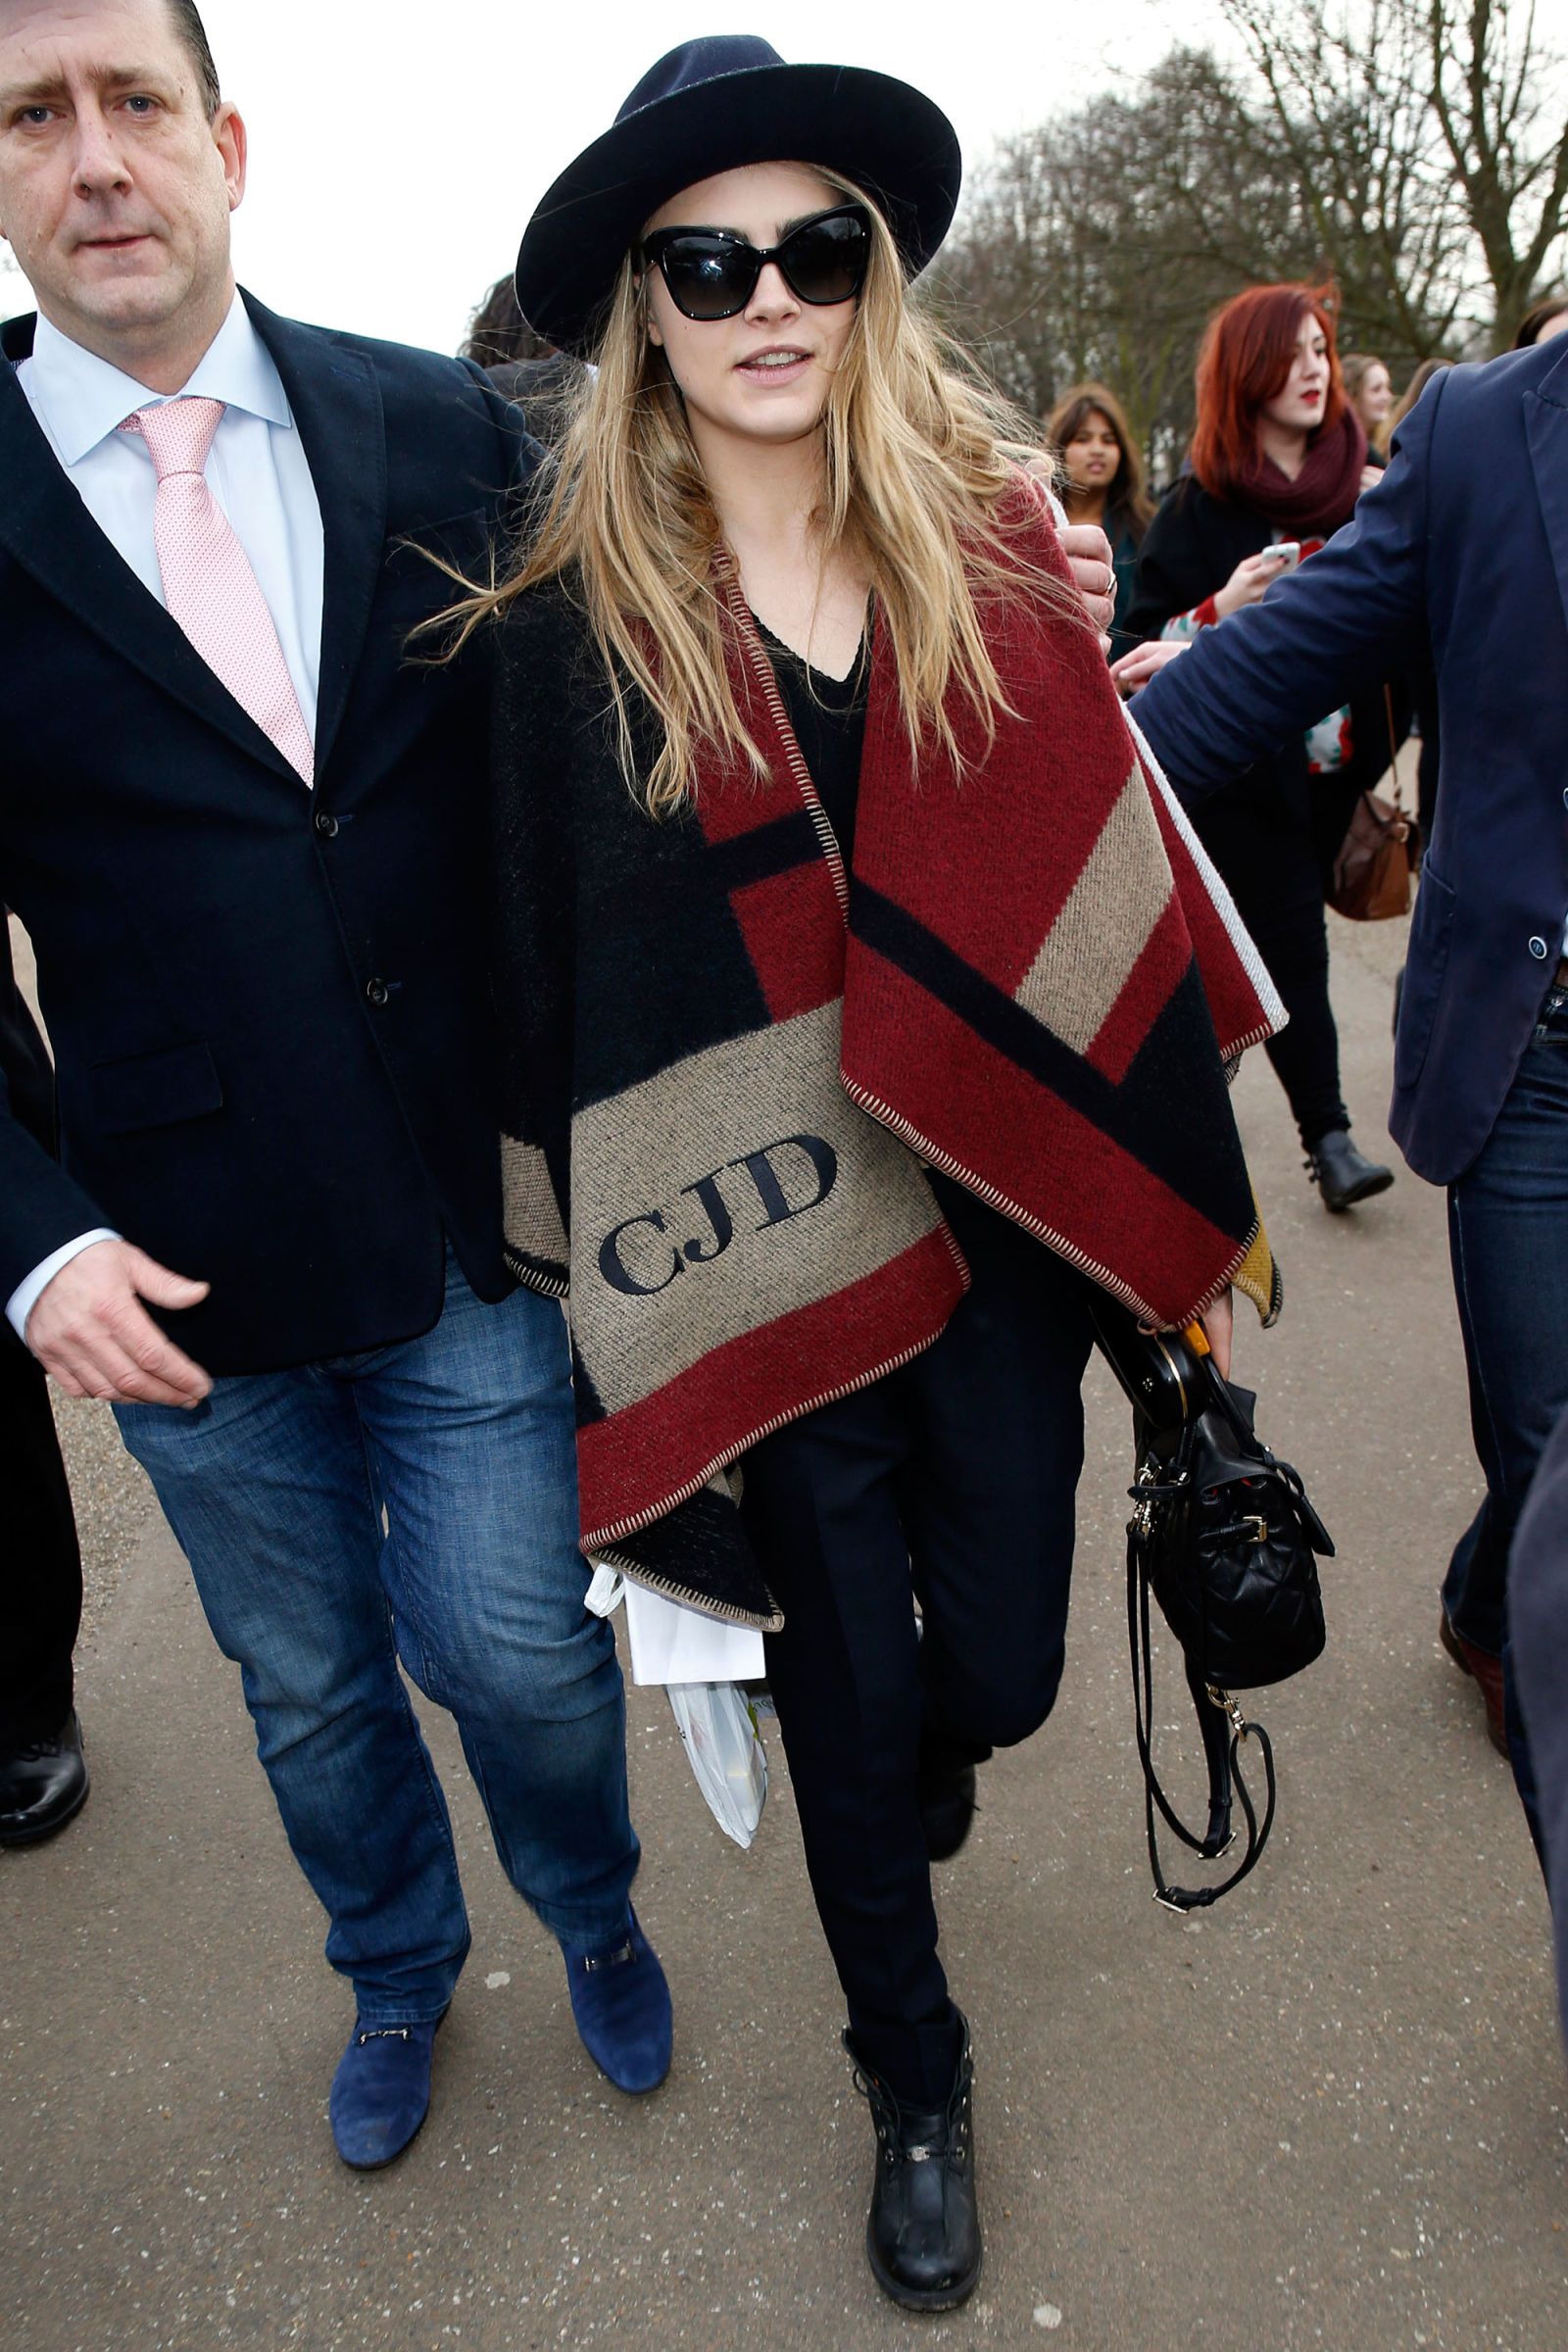 Burberry Cape Coat Best Celebrity Looks In The Burberry Cape